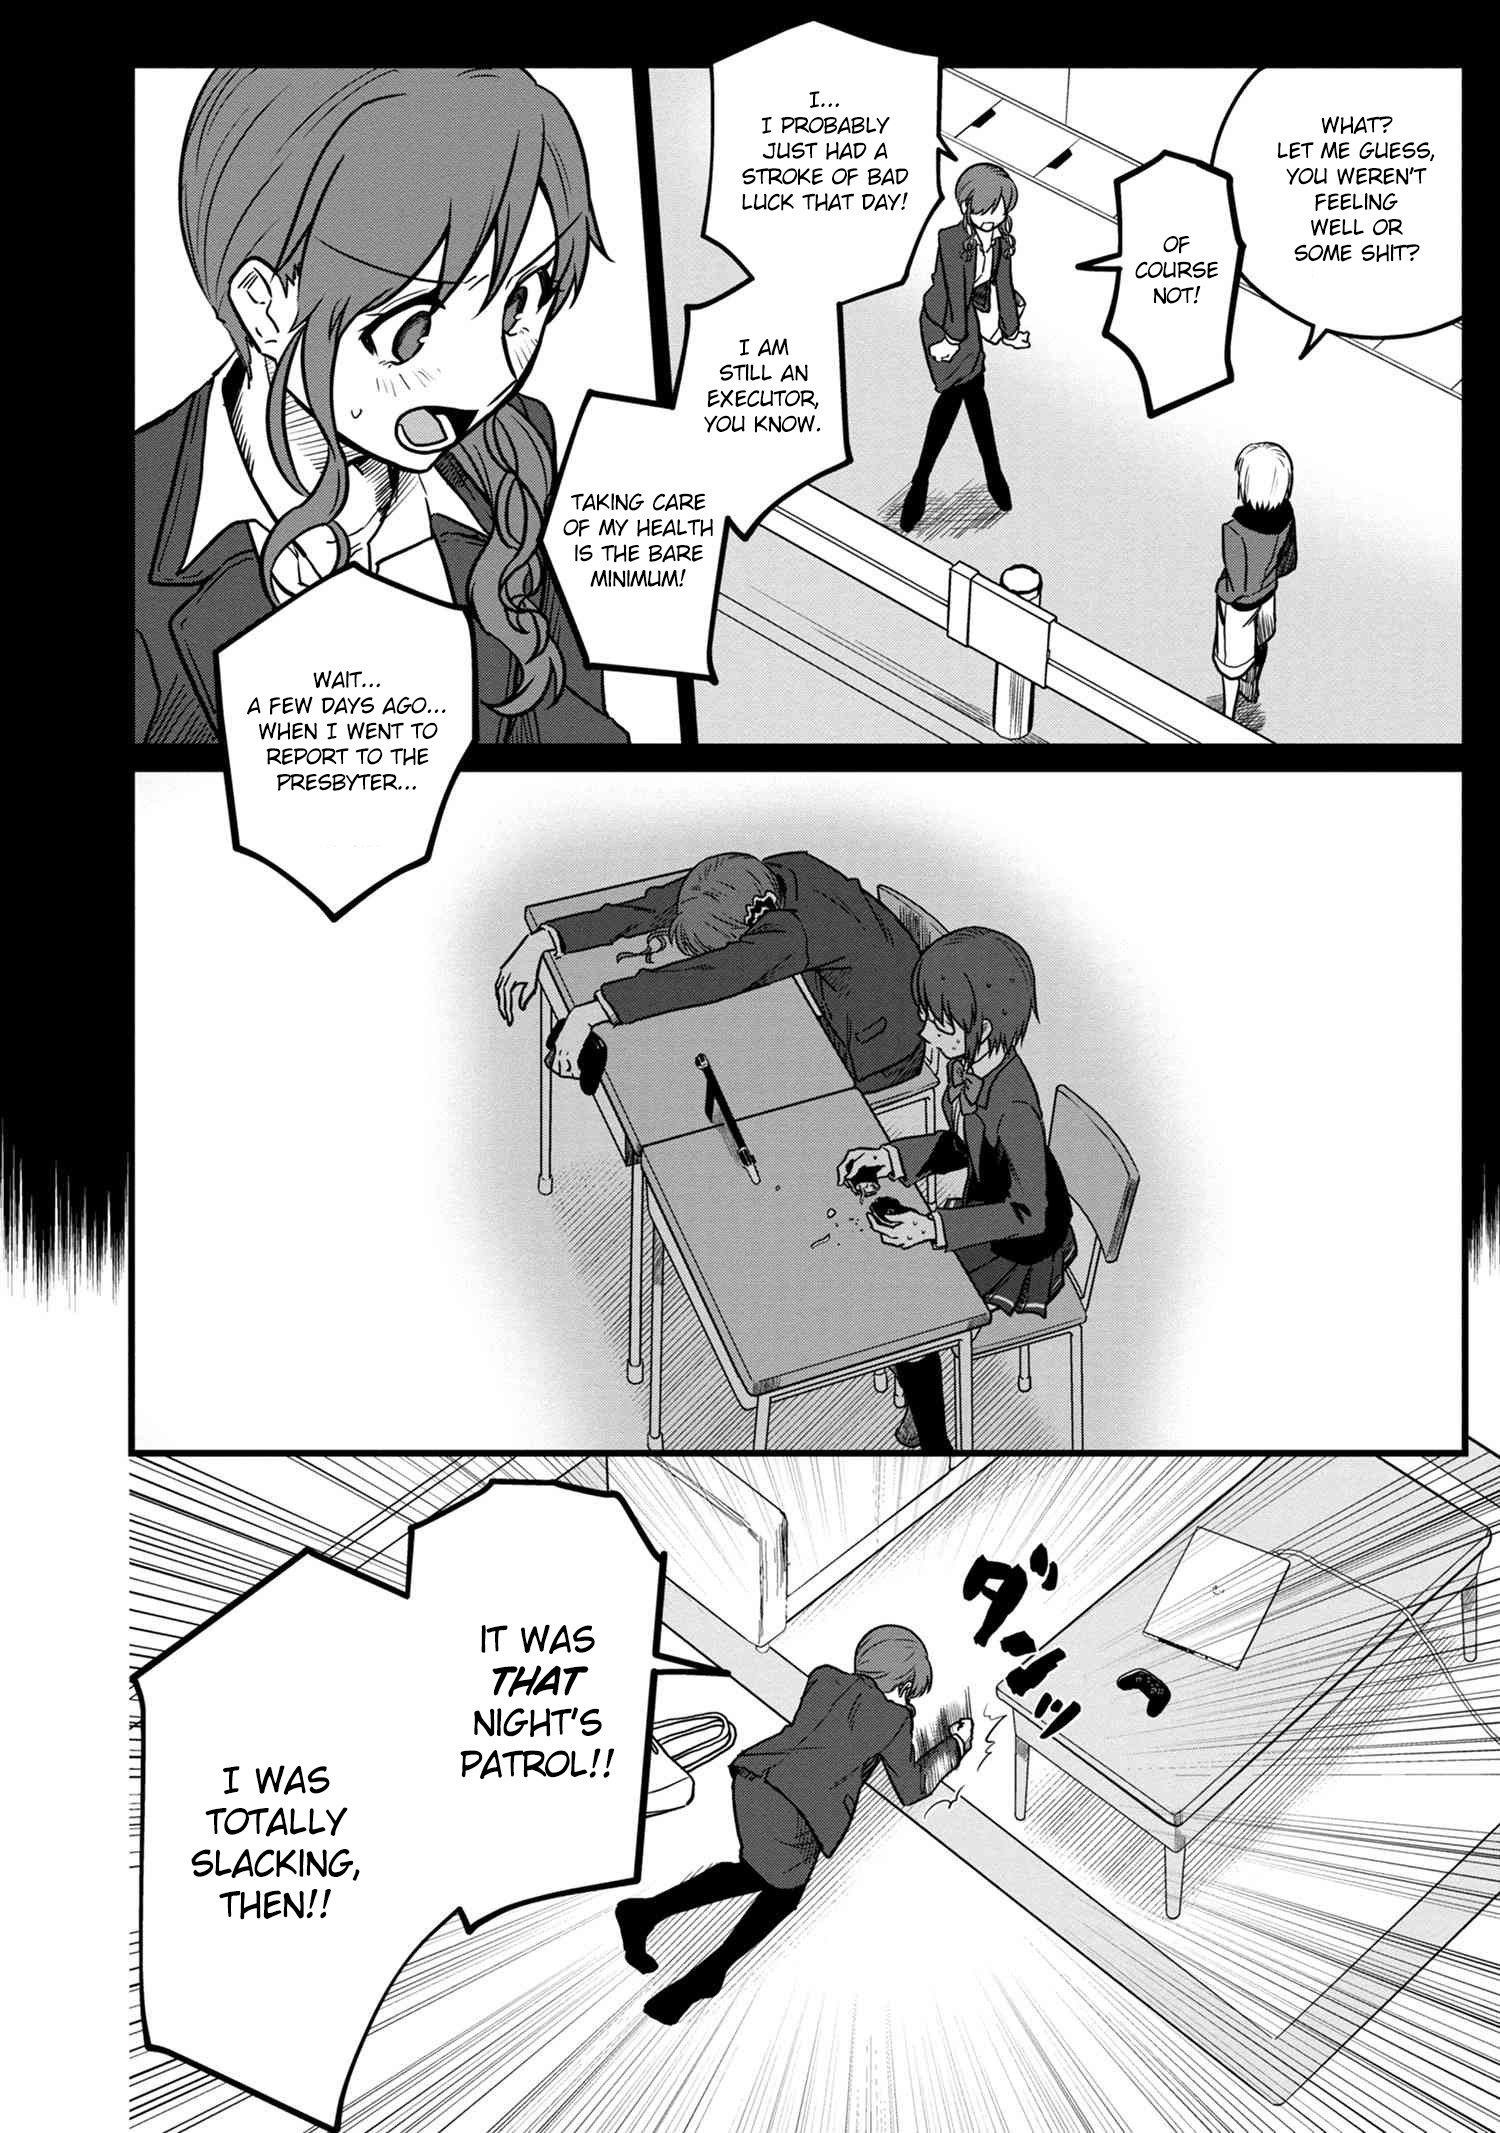 Melty Blood: Type Lumina Piece In Paradise - chapter 6.1 - #6